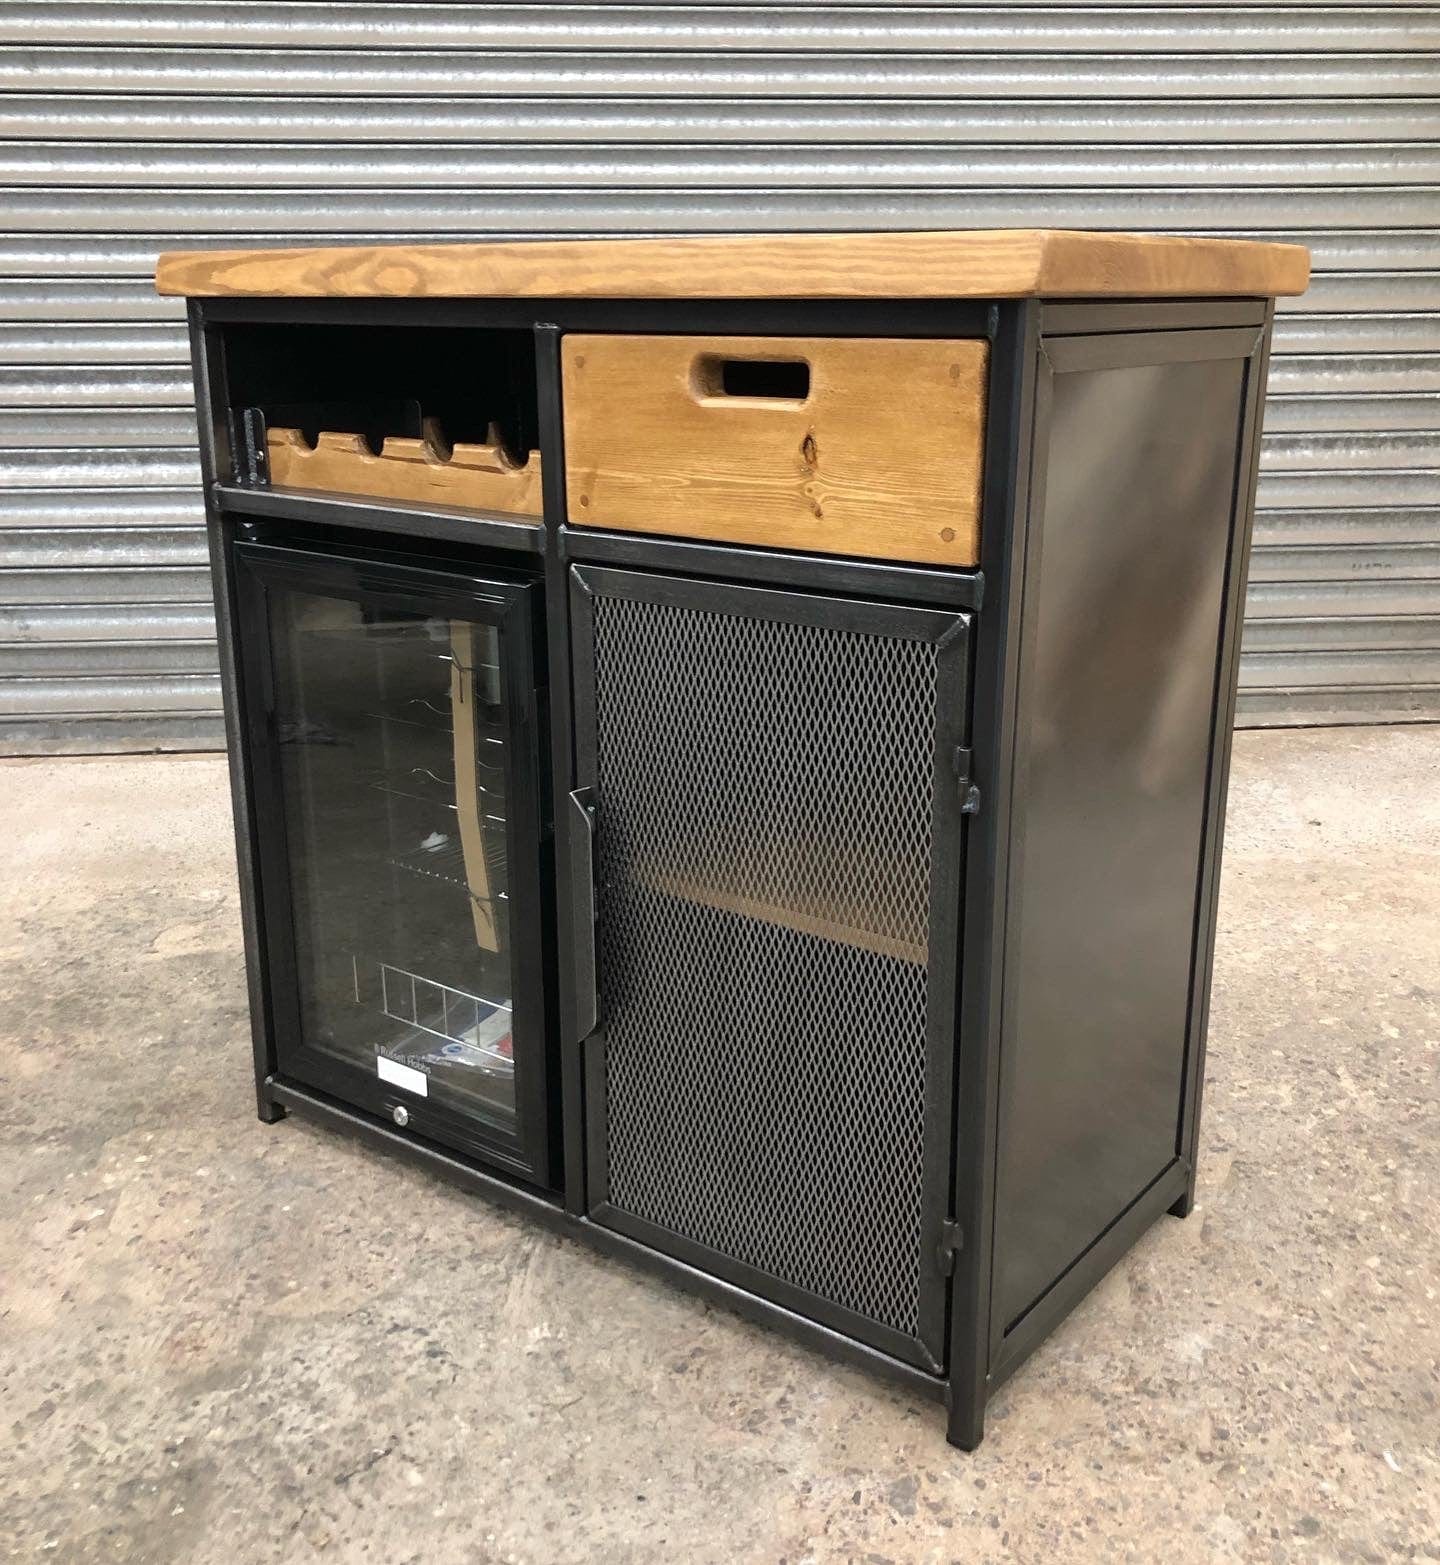 Modern Industrial Home Bar Drinks Cabinet with Built-In Fridge, Wine Rack and Drawer  RSD Furniture   